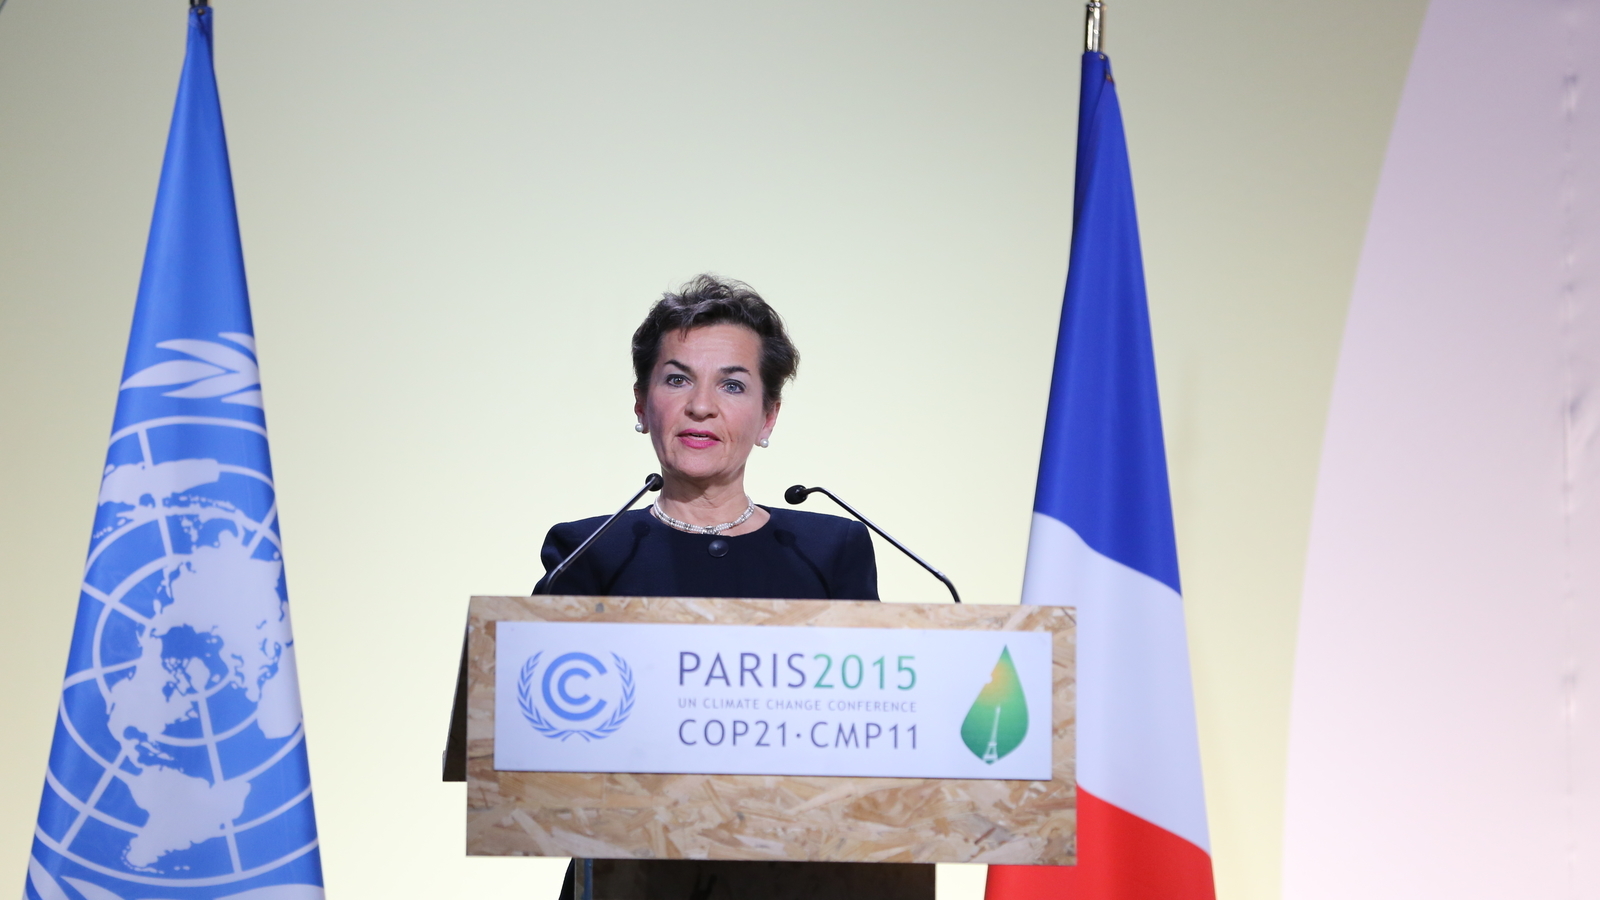 Christiana Figueres at the Paris Climate Change Conference in 2015